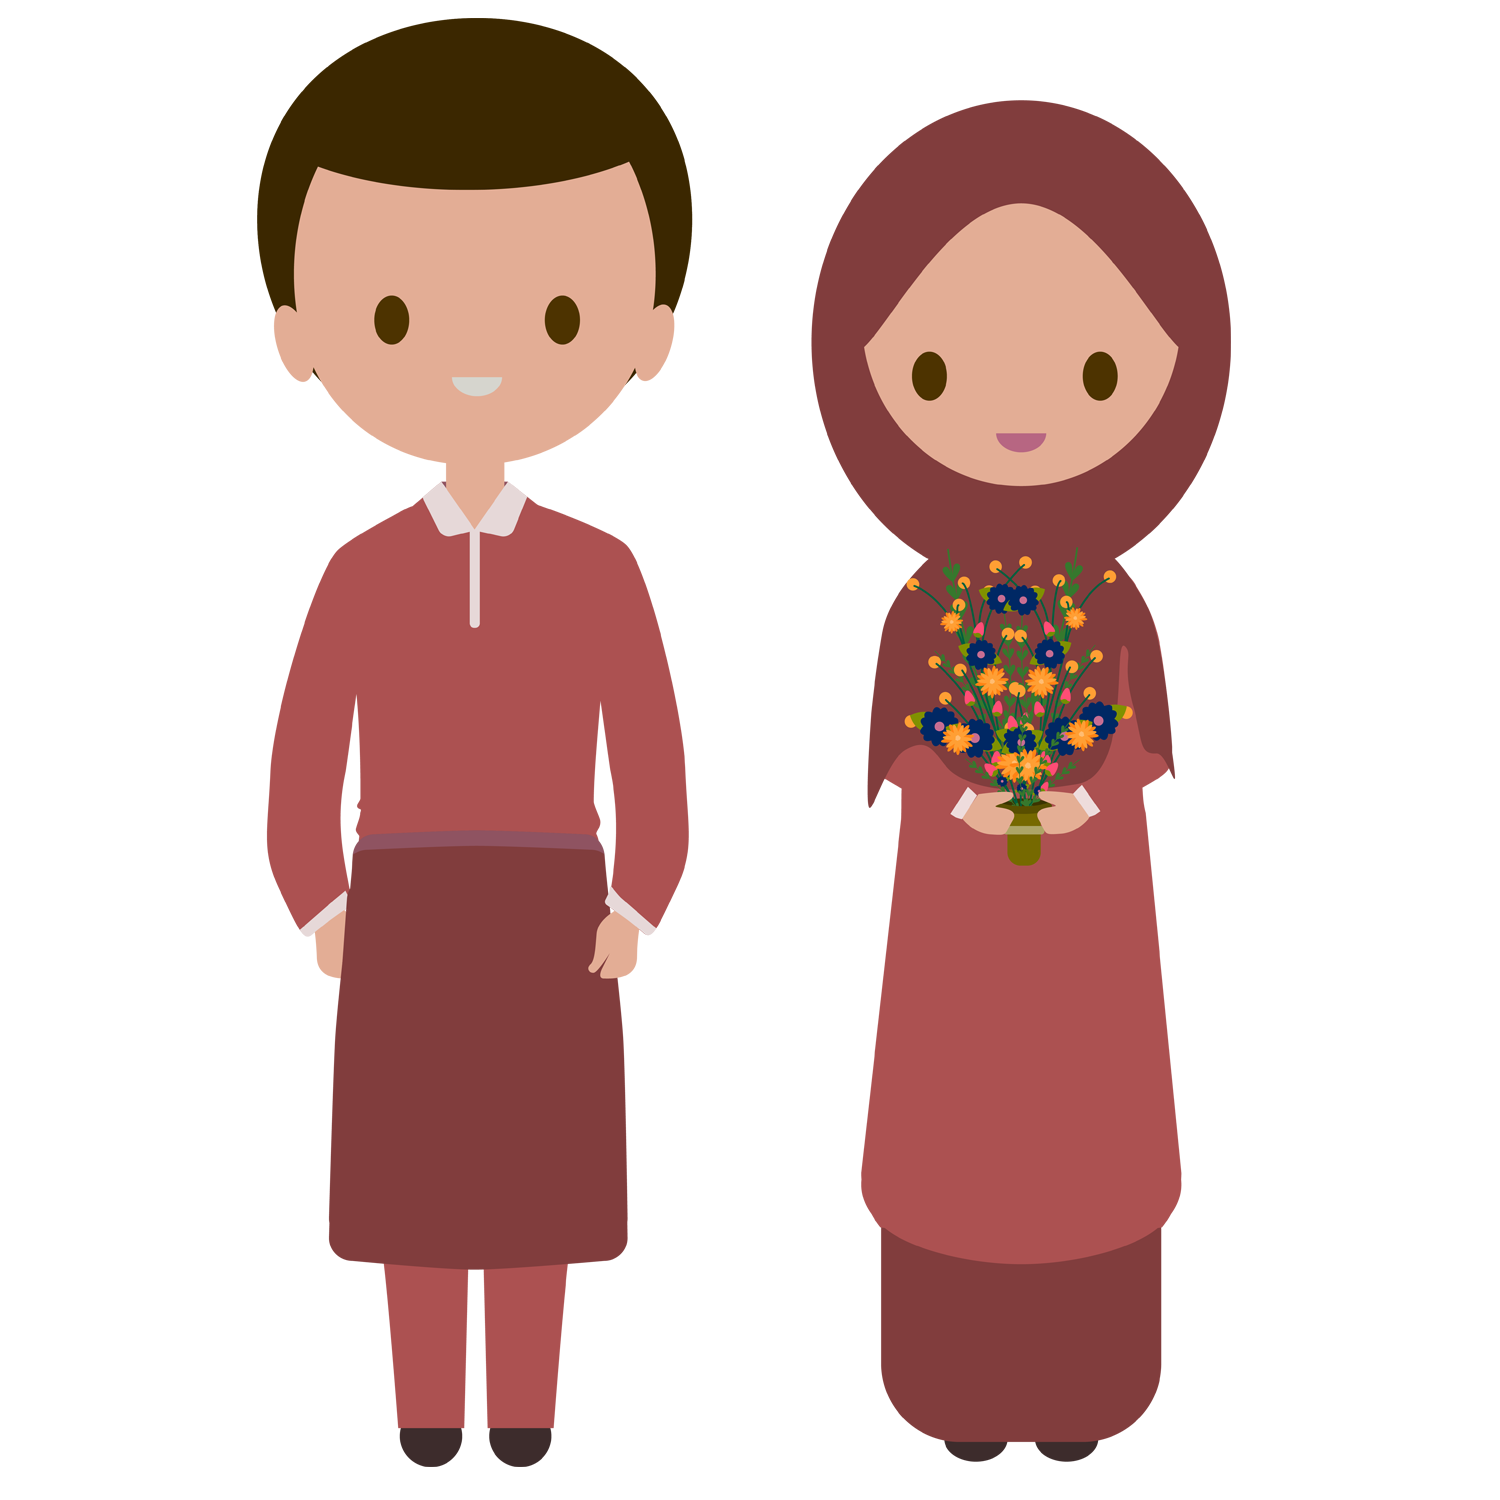 Pngtree—muslim-couple-wedding-malay-bride_6437667.png